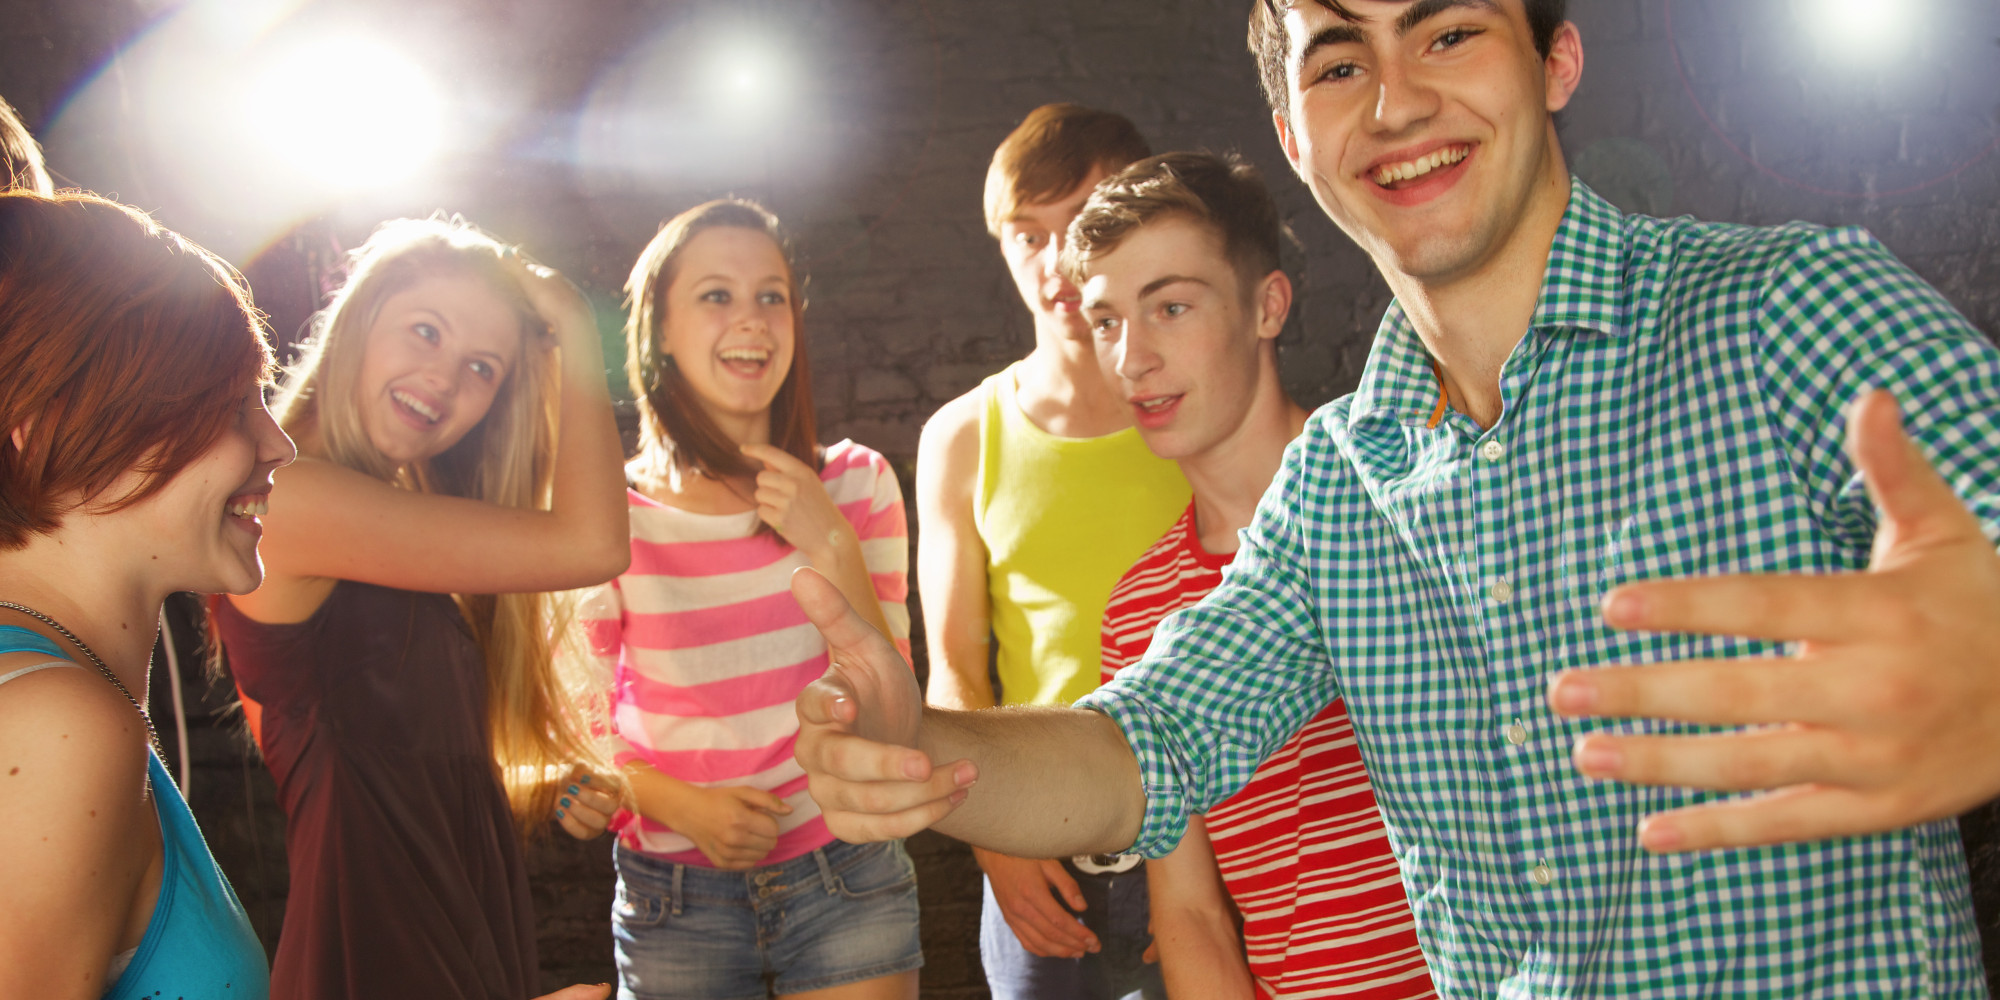 Asking Teens About Their Dream Dates | HuffPost